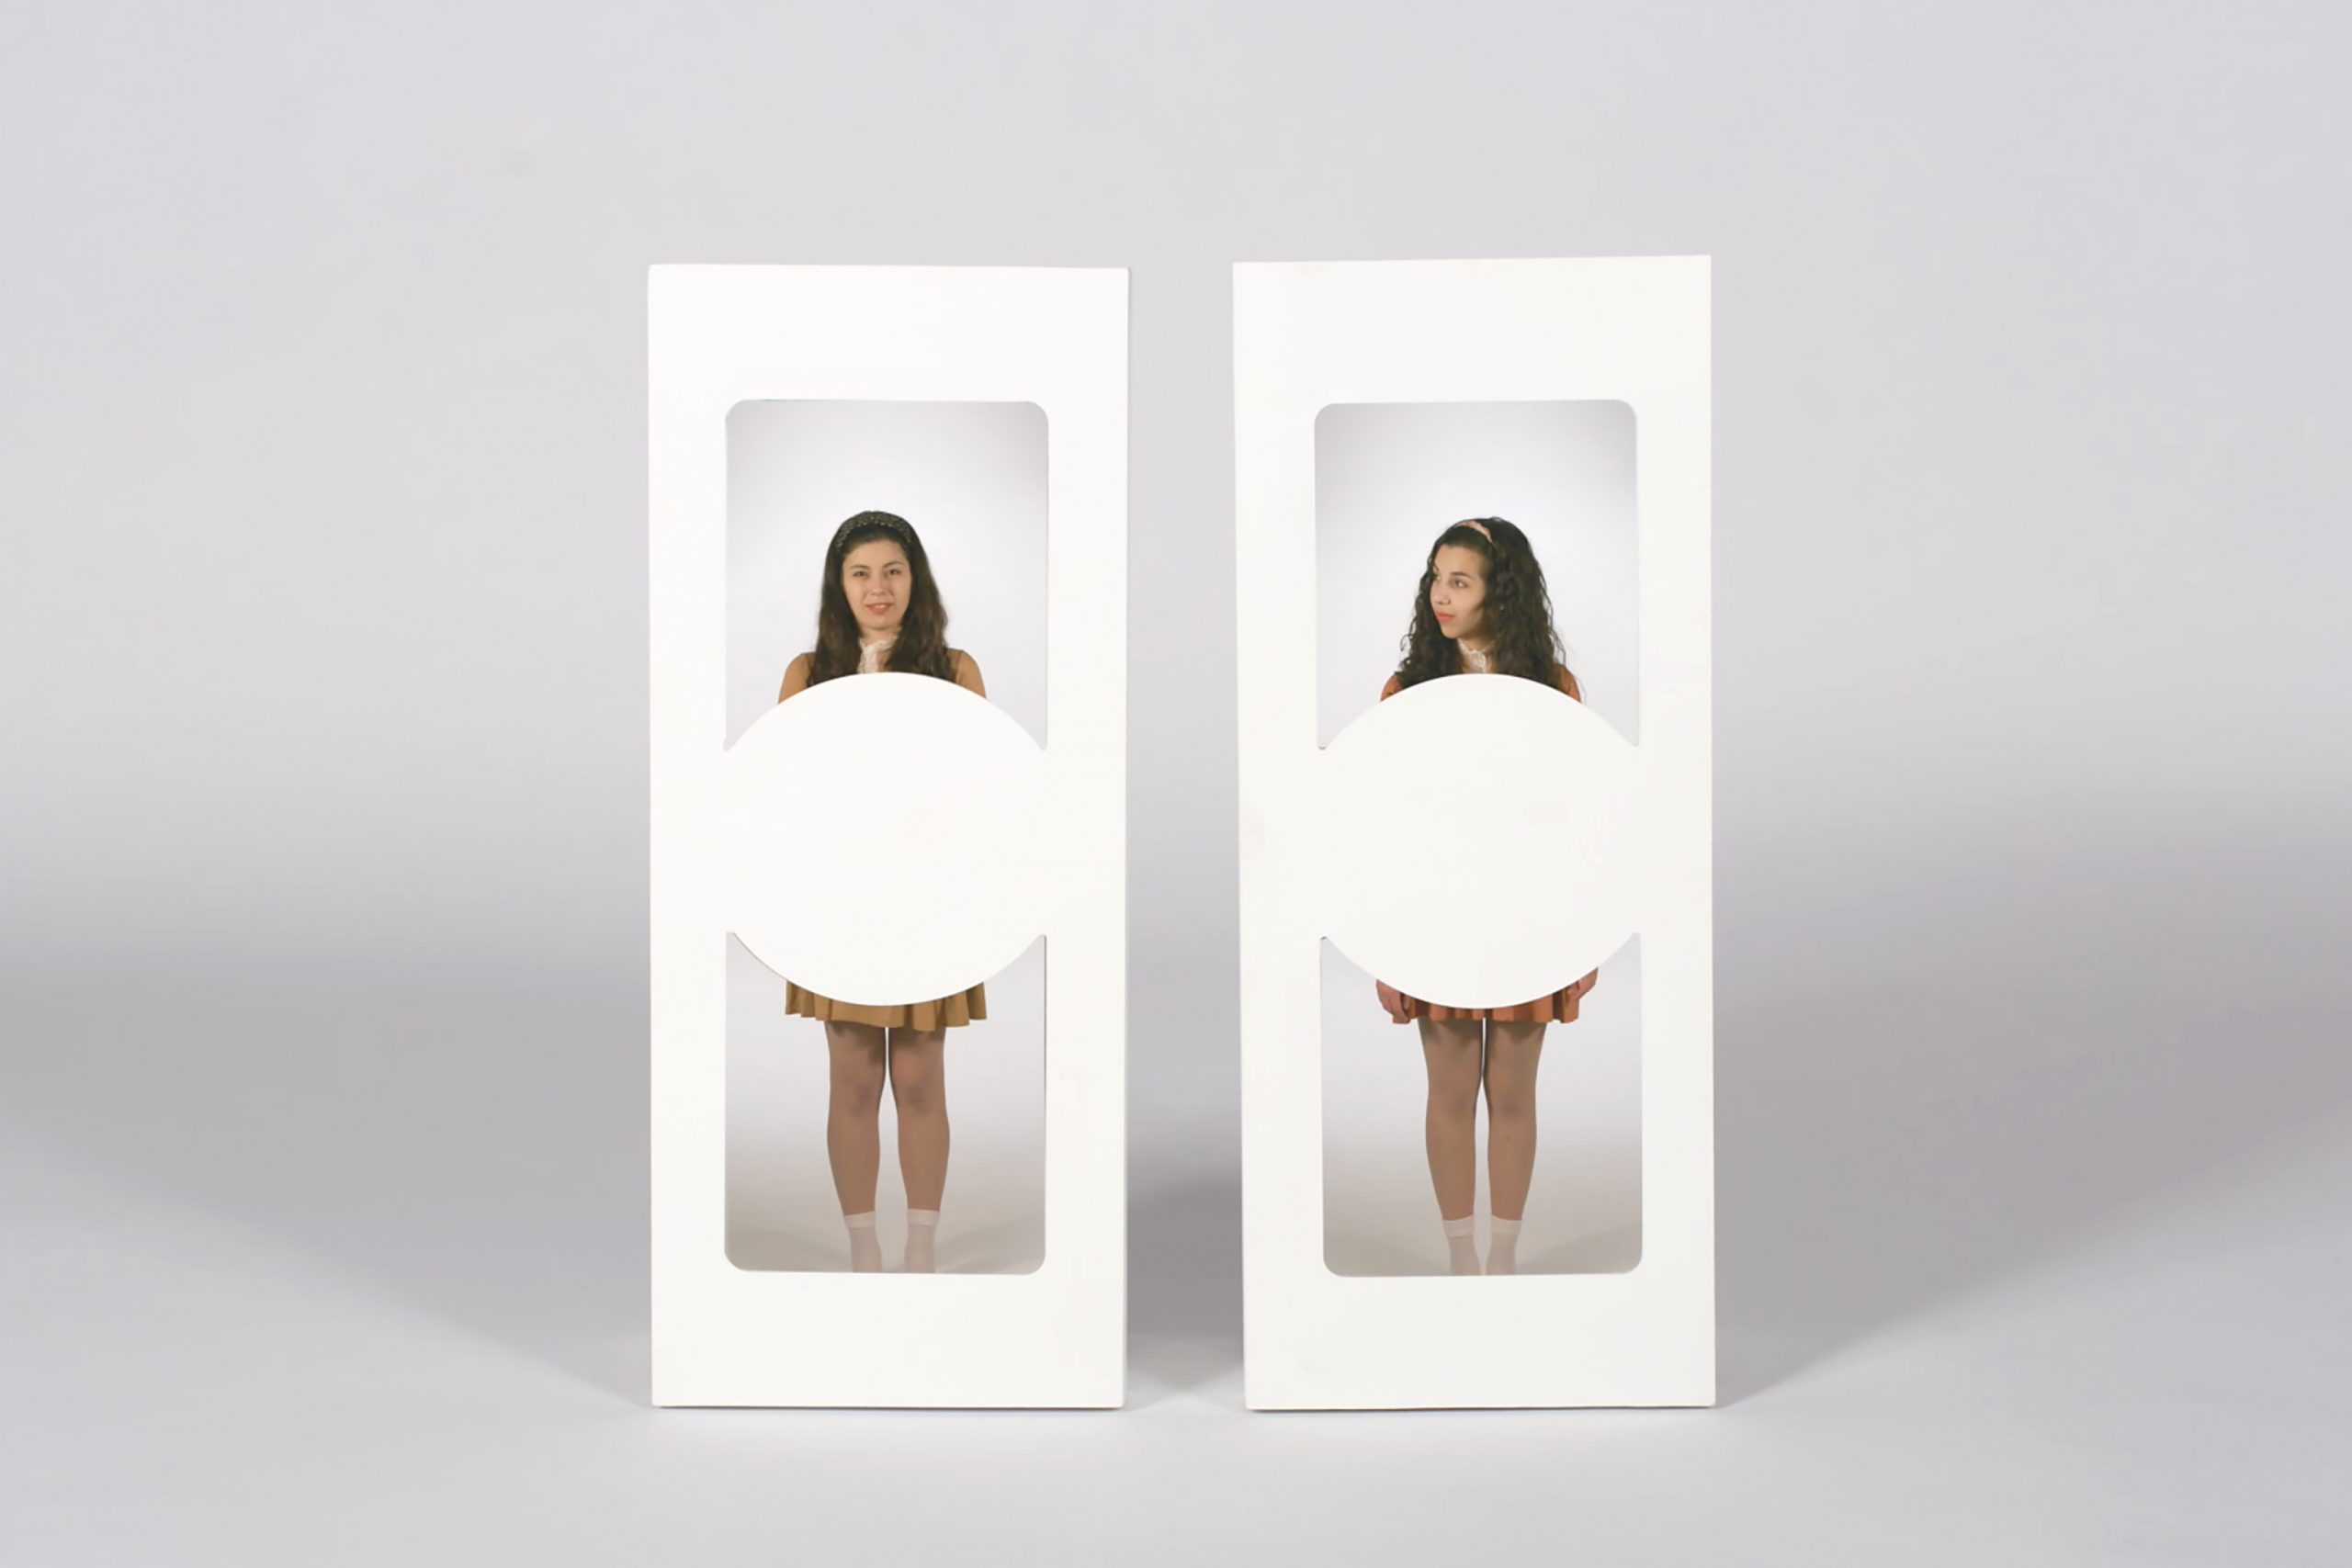 A still from Different Editions of the Same Kind by Alexia Kokozaki featuring two figures standing side by side in white, rectangular cutouts